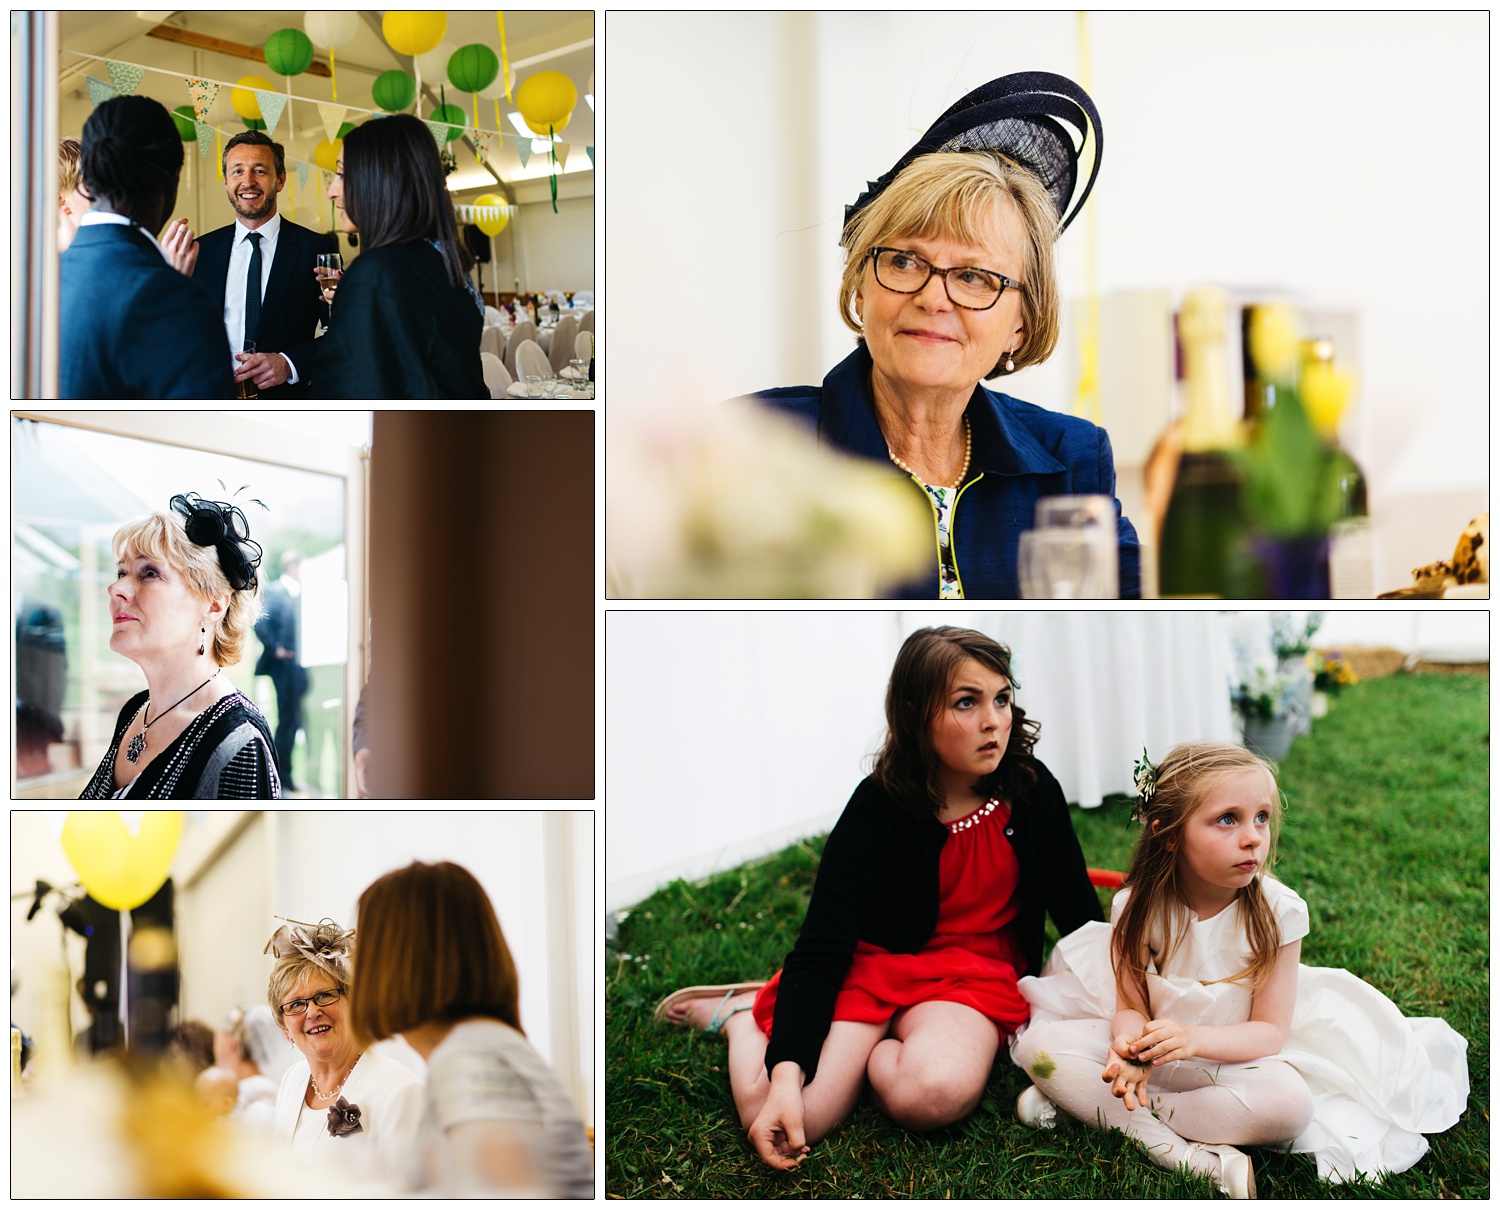 natural photographs of people and children at a wedding in Norfolk